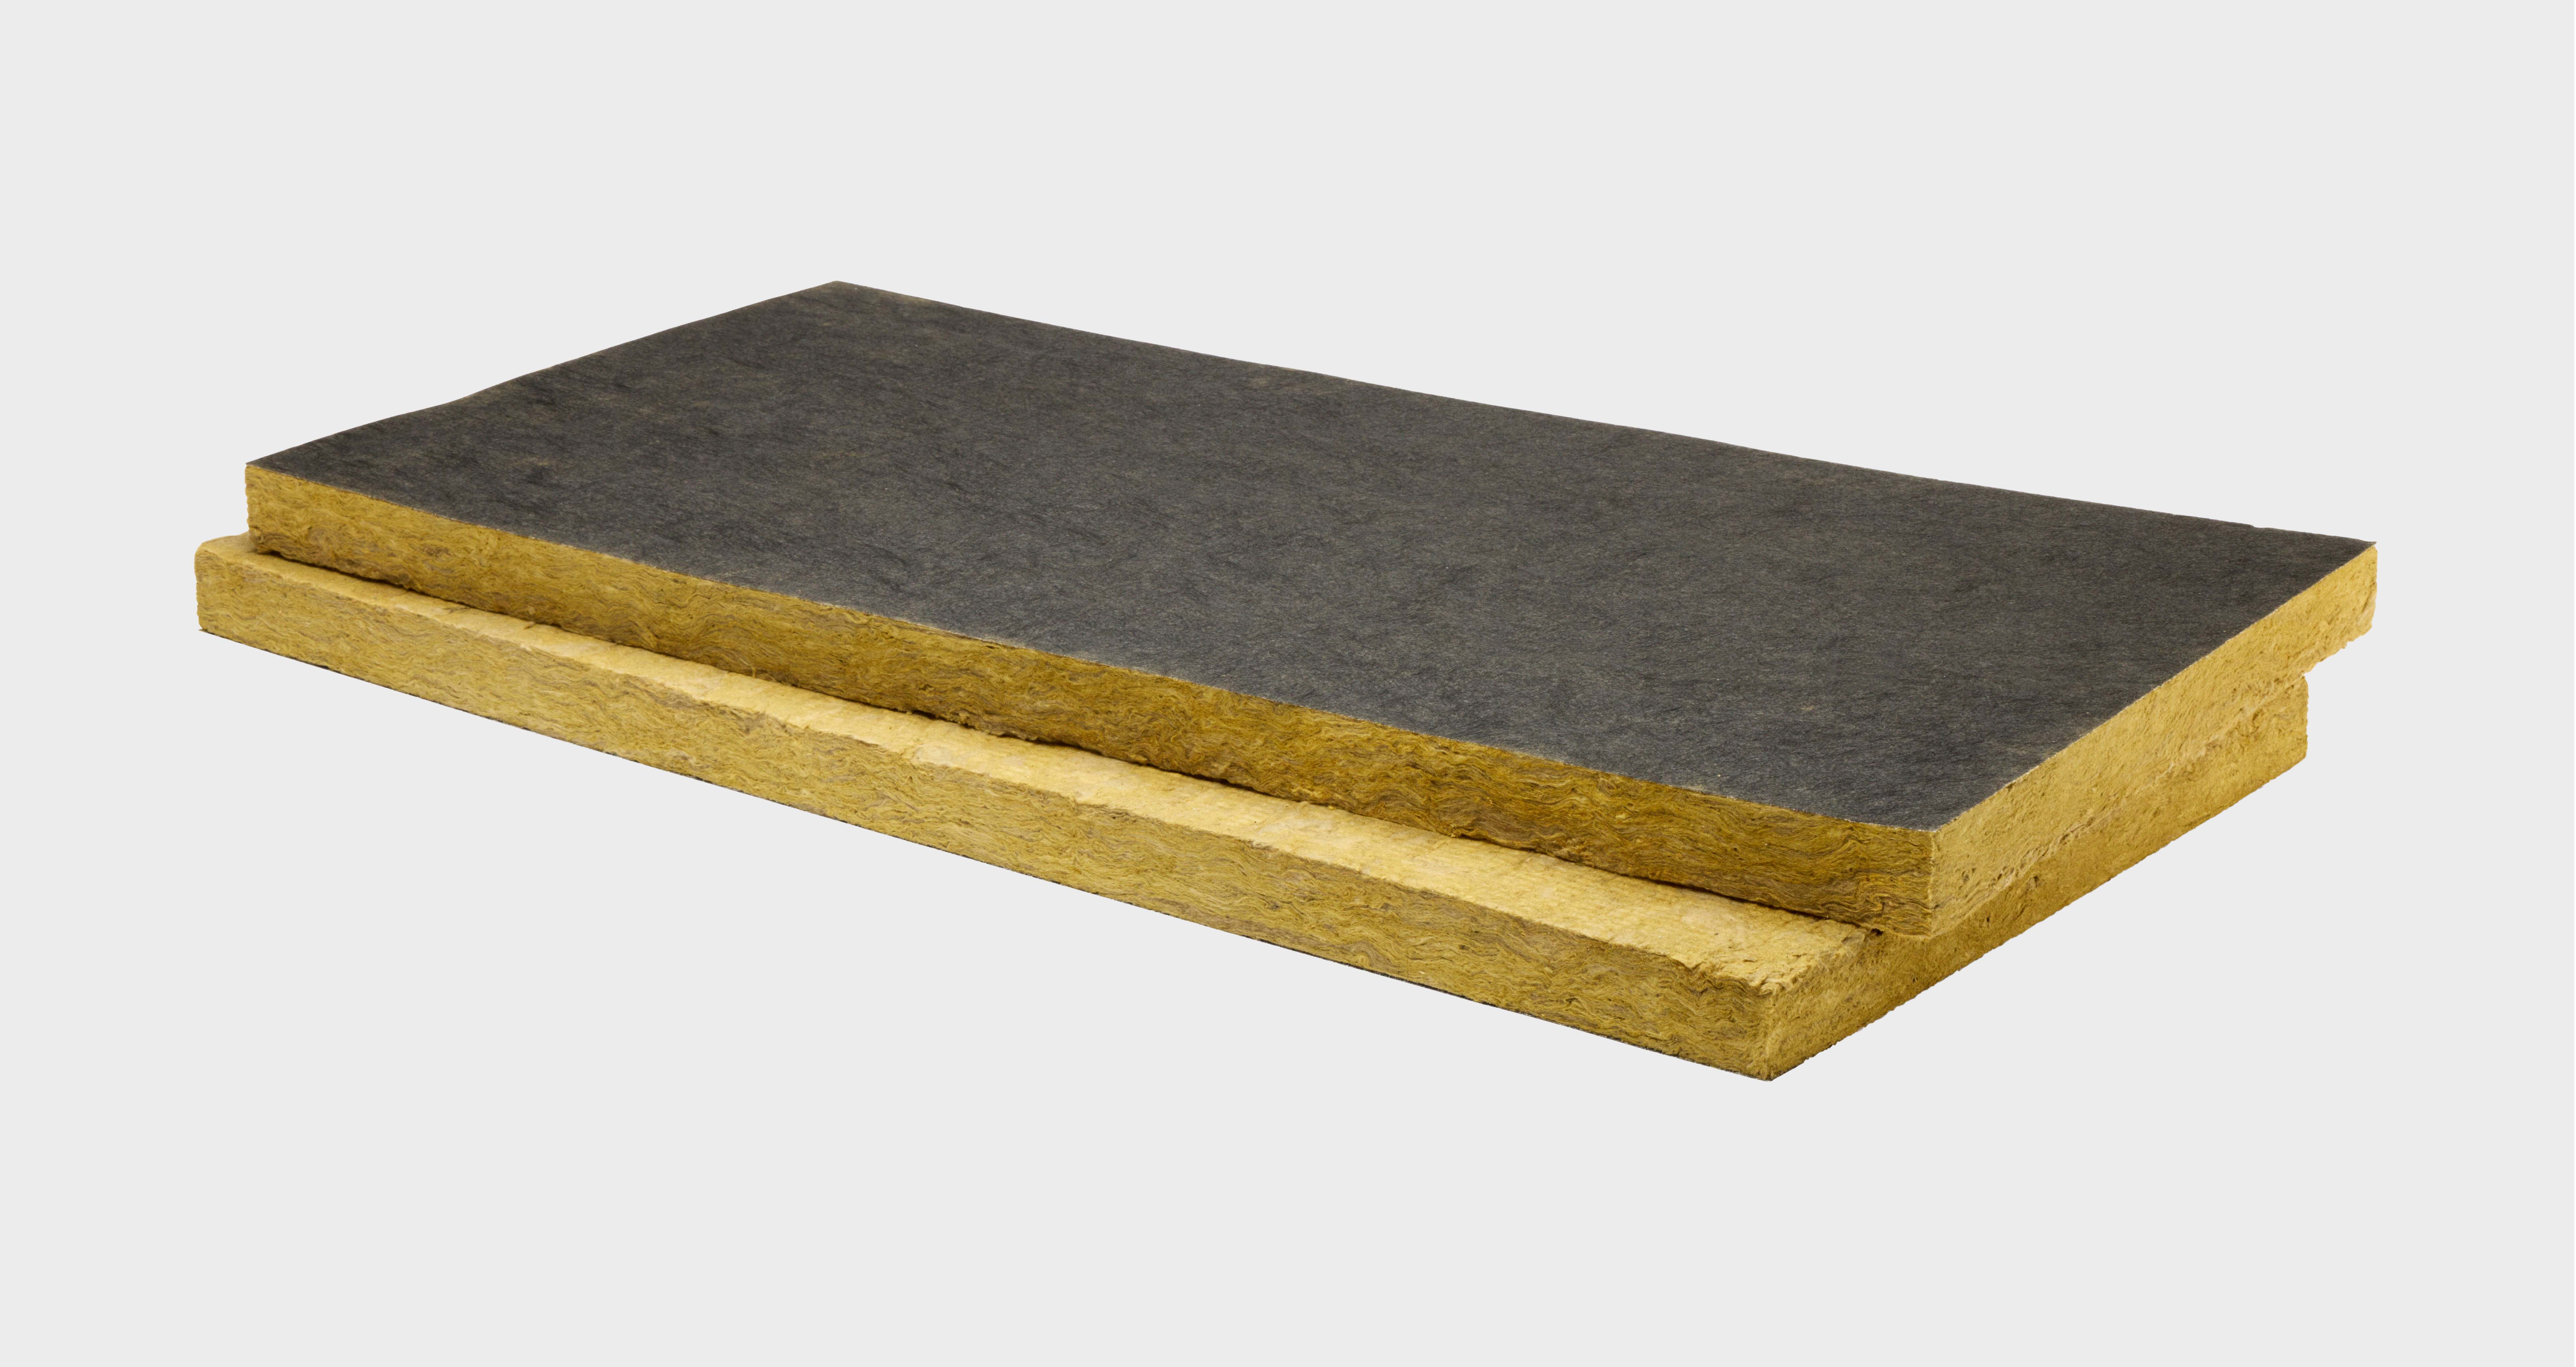 Hot Rockwool Insulation R Value Rock Wool Sound Absorbing Board Price -  China Rockwool Sound Absorber, Rock Wool R Value